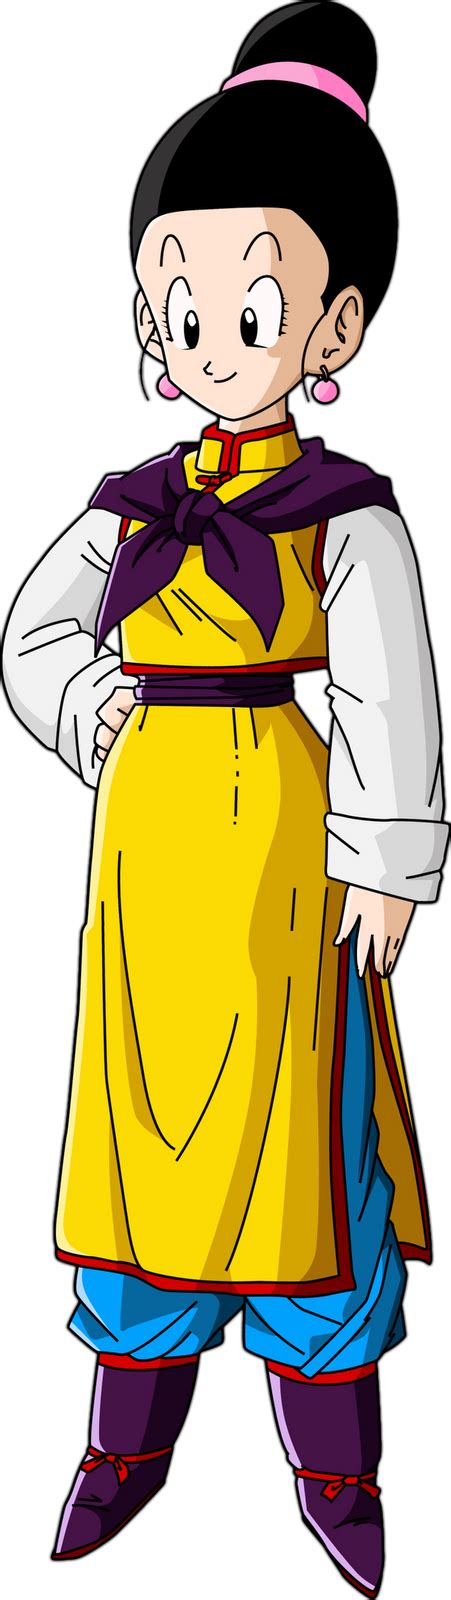 Chi chi metadinha dragon ball. Image - Render Dragon Ball Chi-Chi.png | Heroes Wiki | Fandom powered by Wikia